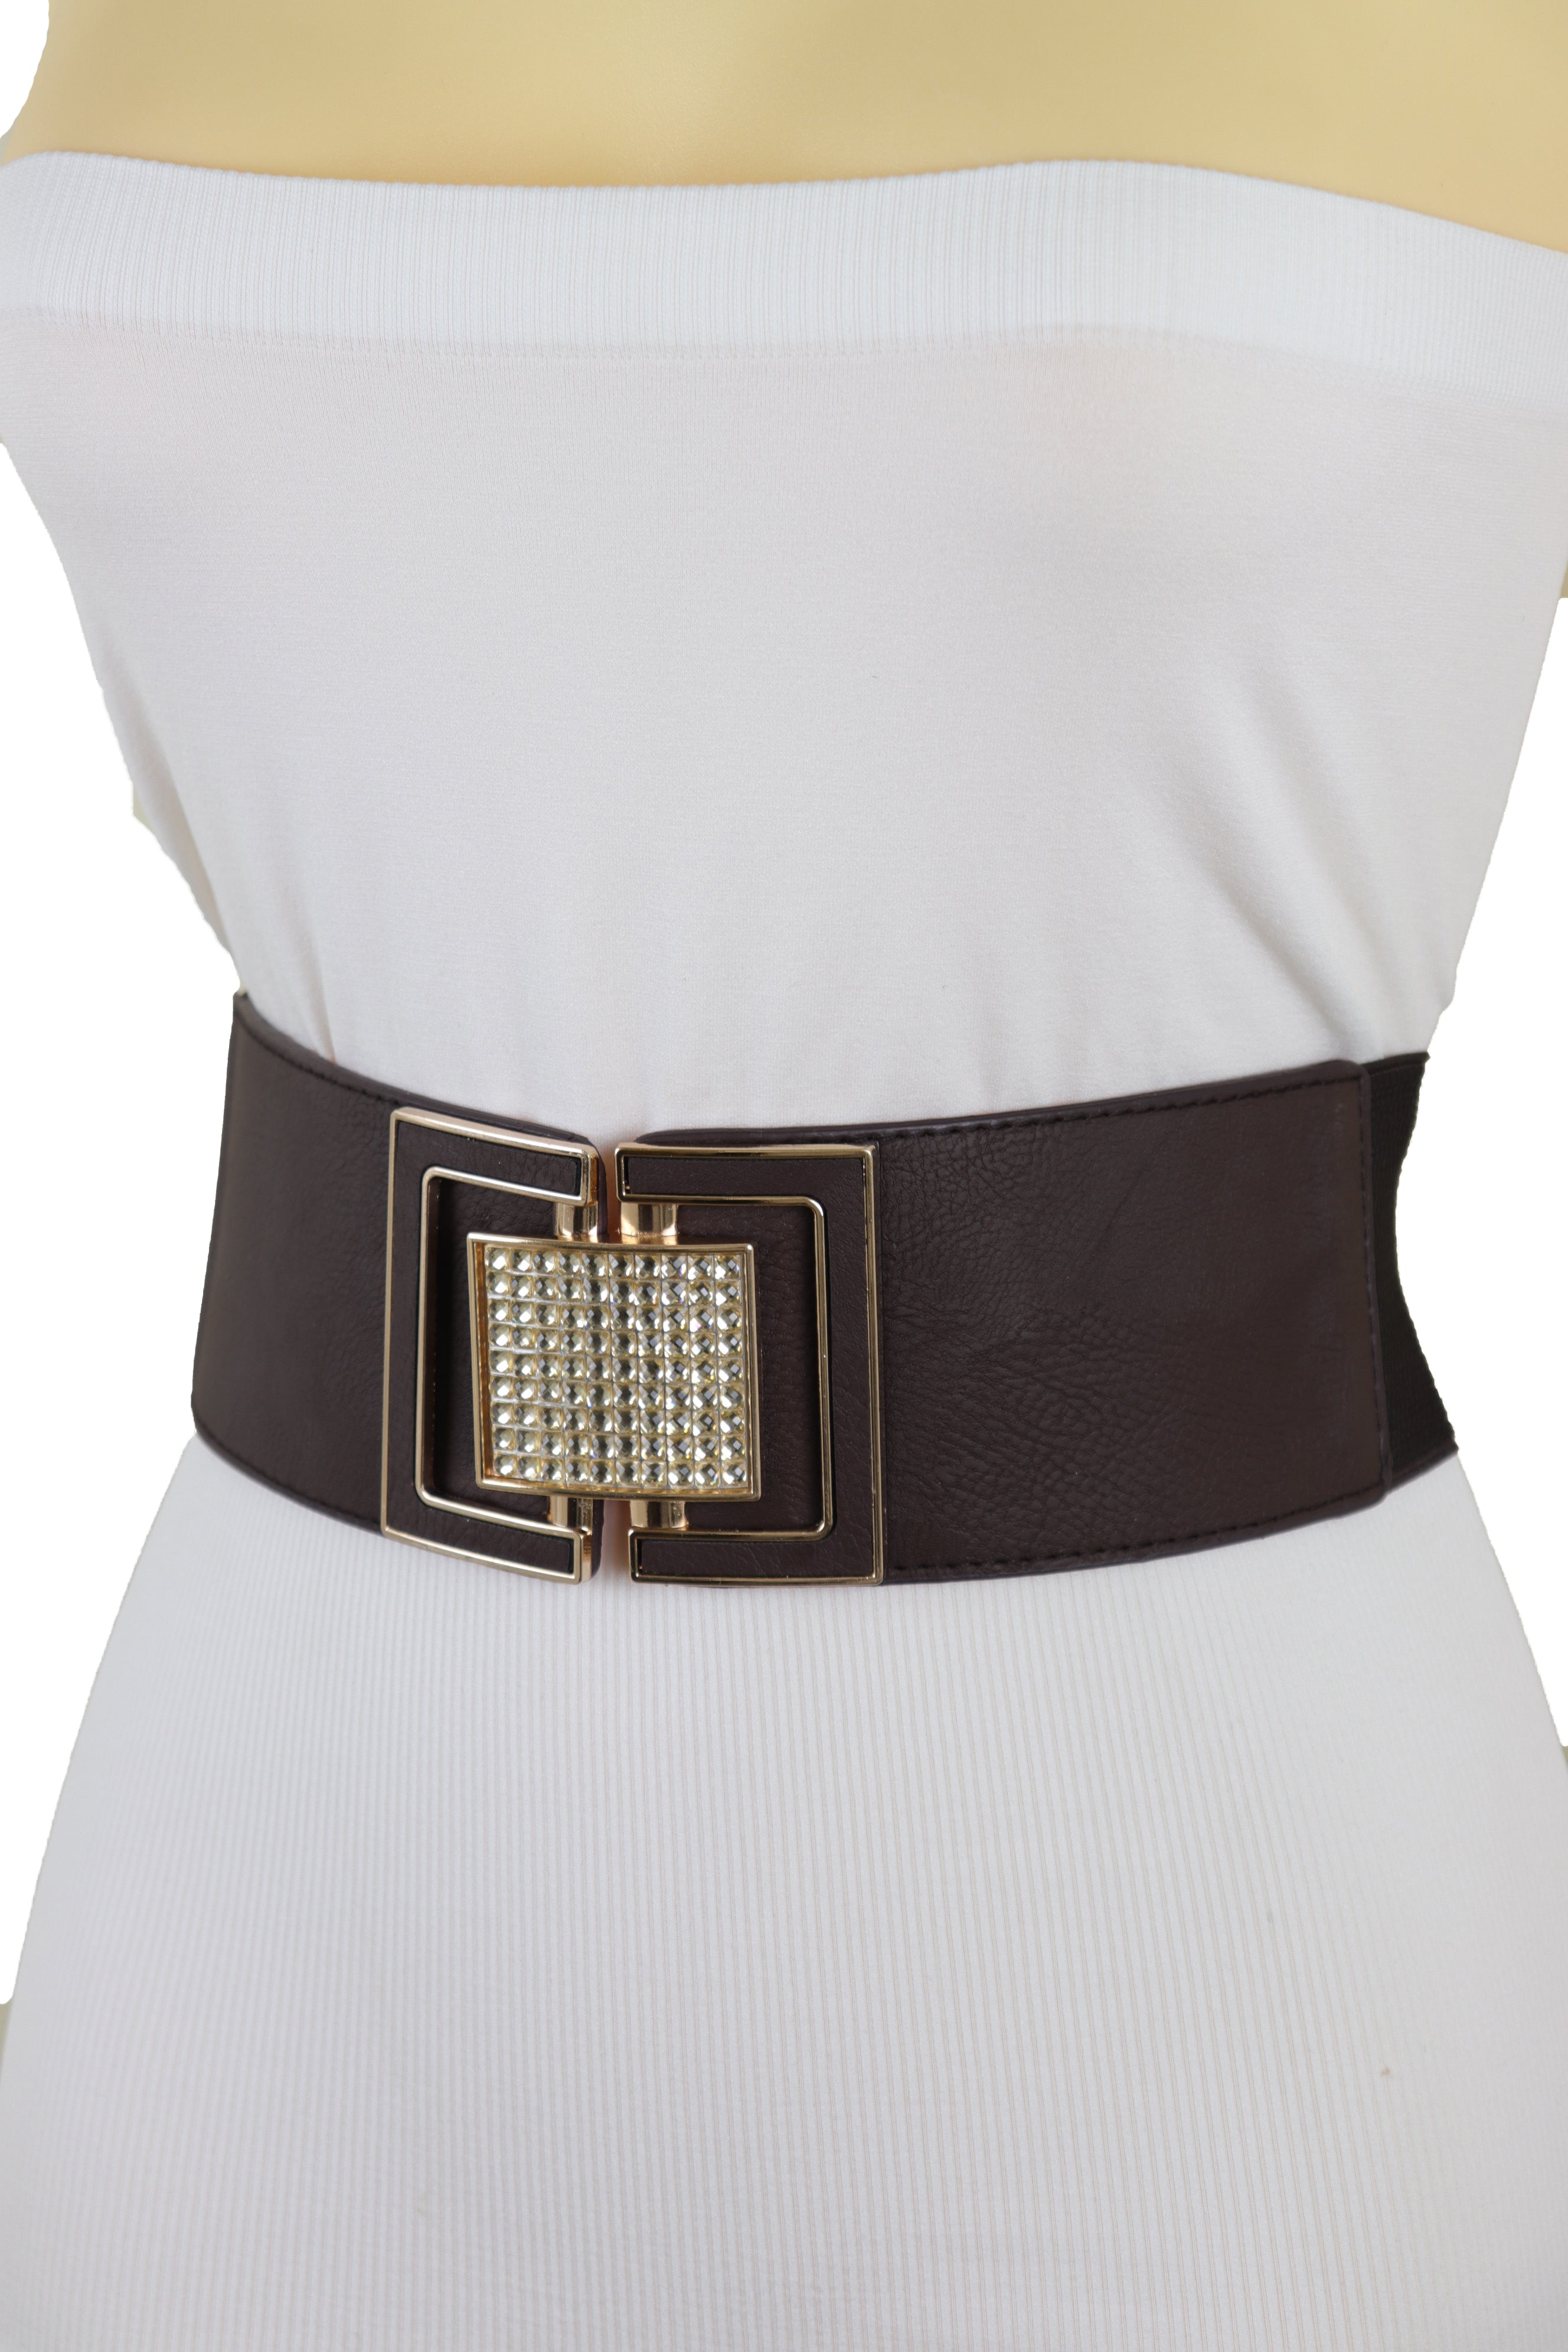 Brand New Women Brown Elastic Belt Gold Square Bling Buckle Fit Size S ...